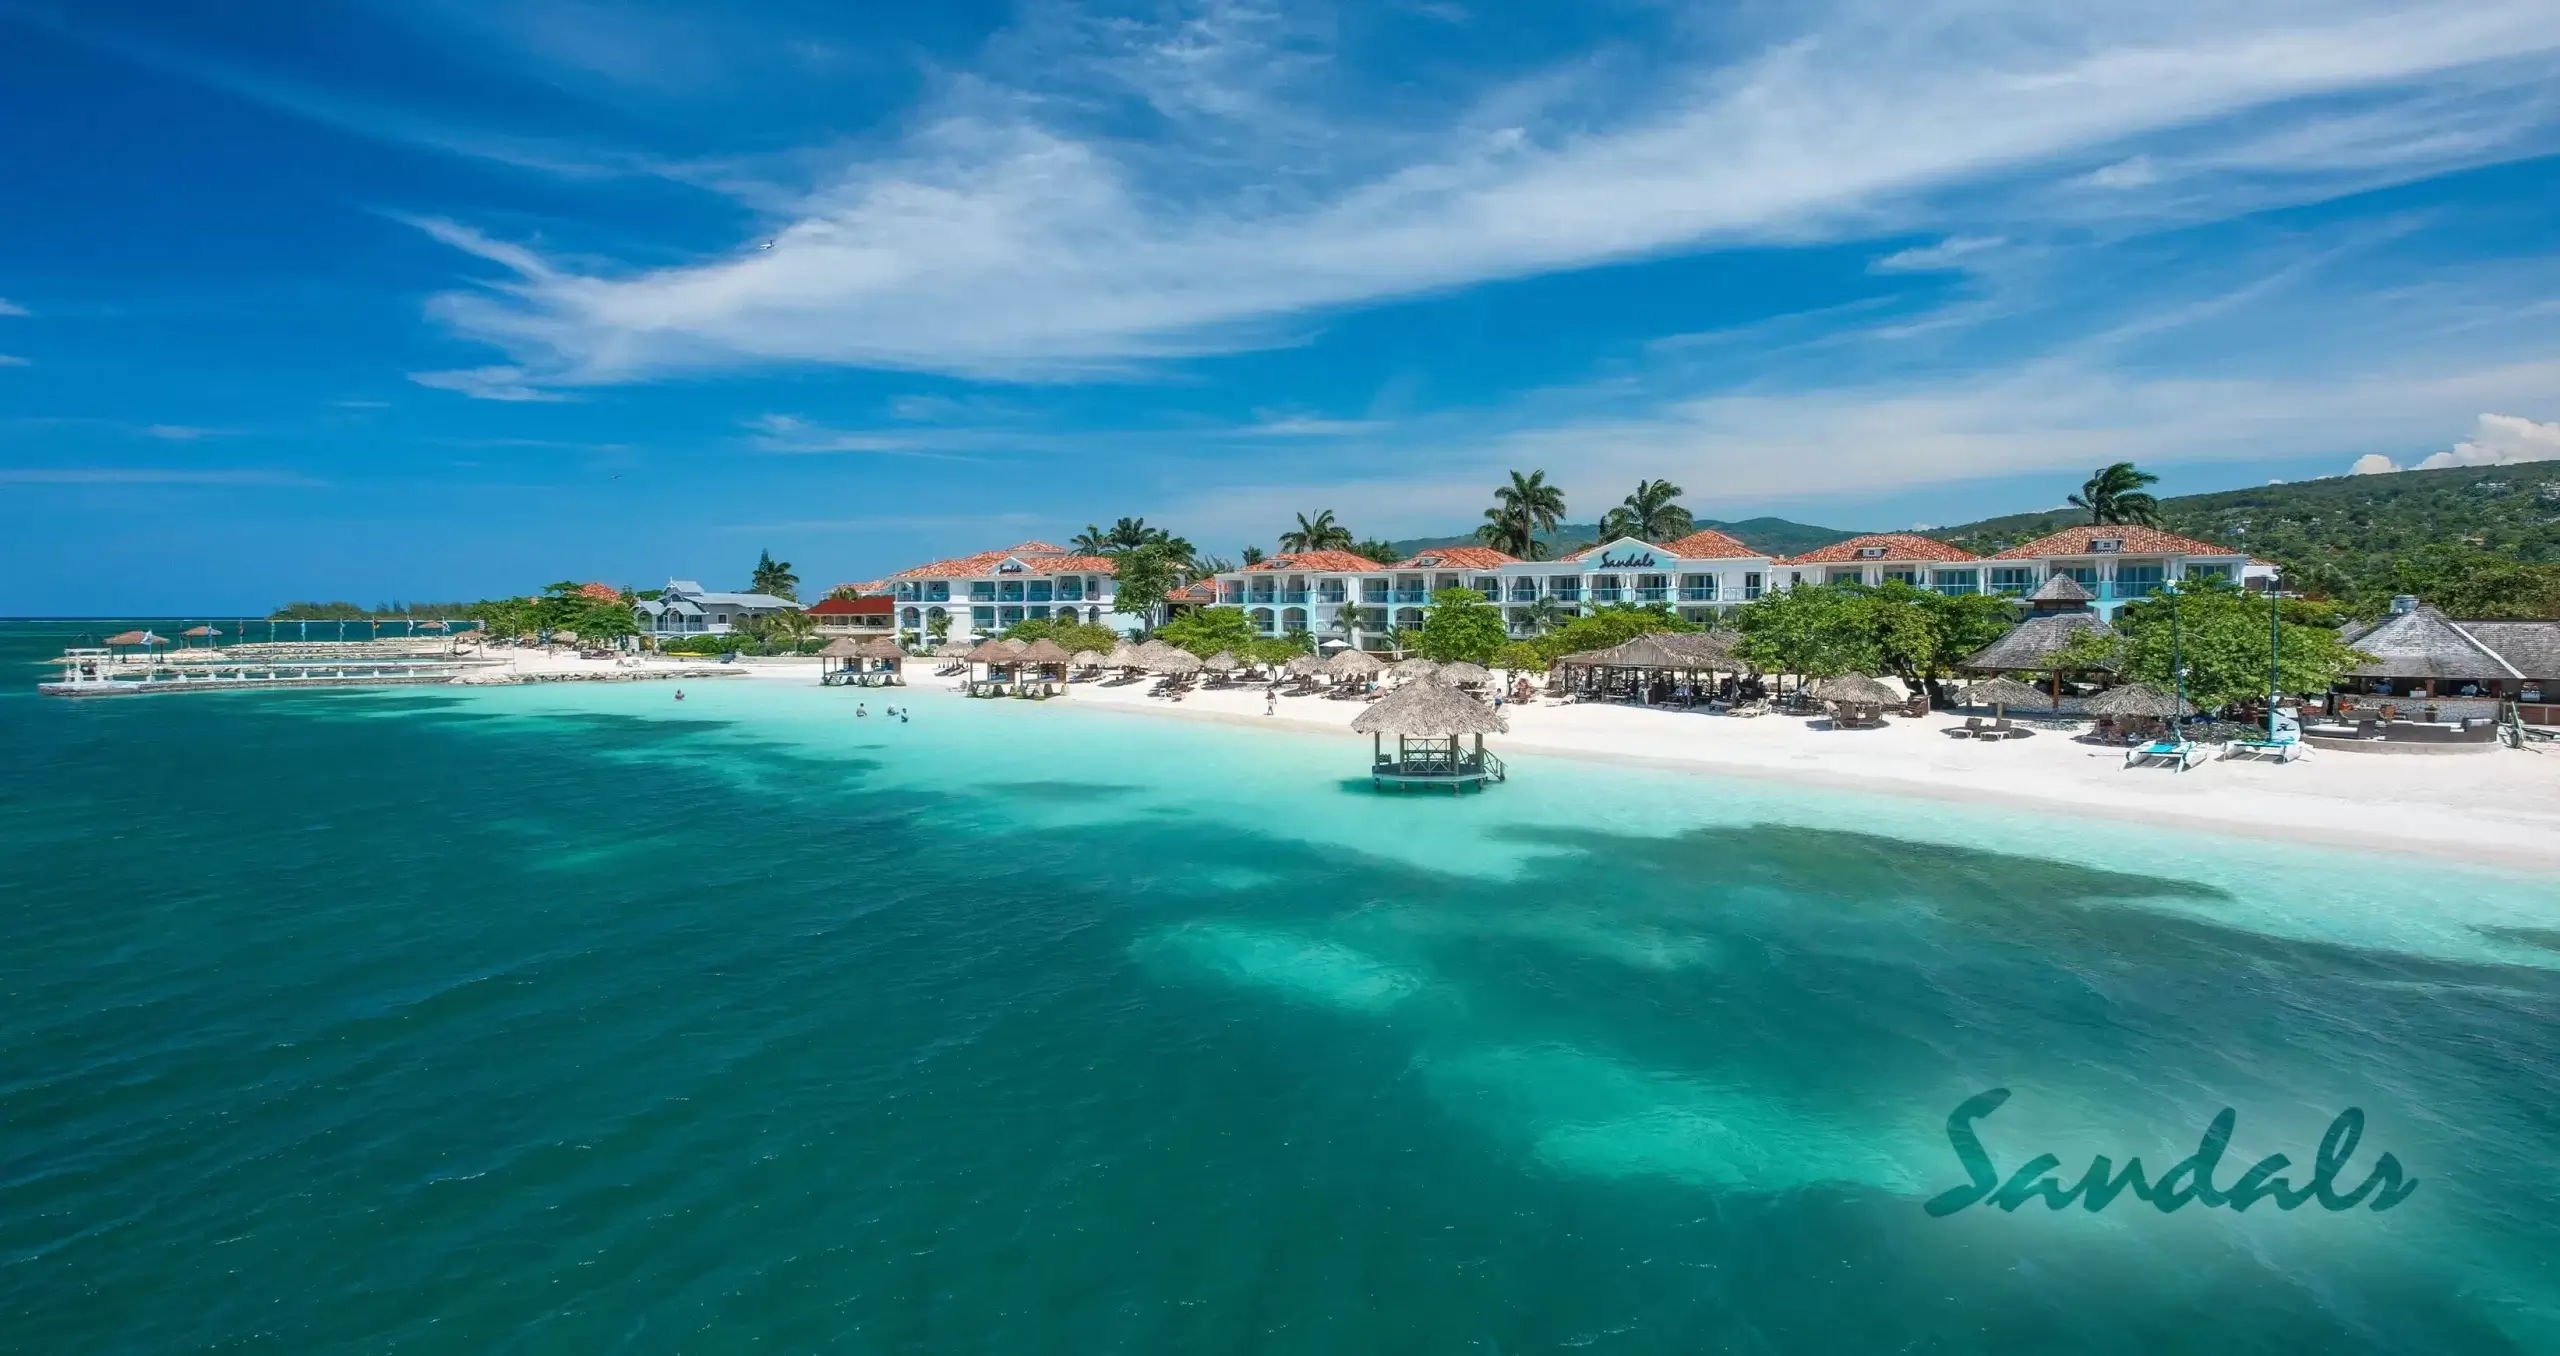 The best sandals resort in Jamaica with white sand and clear blue water and private beach cabanas. 